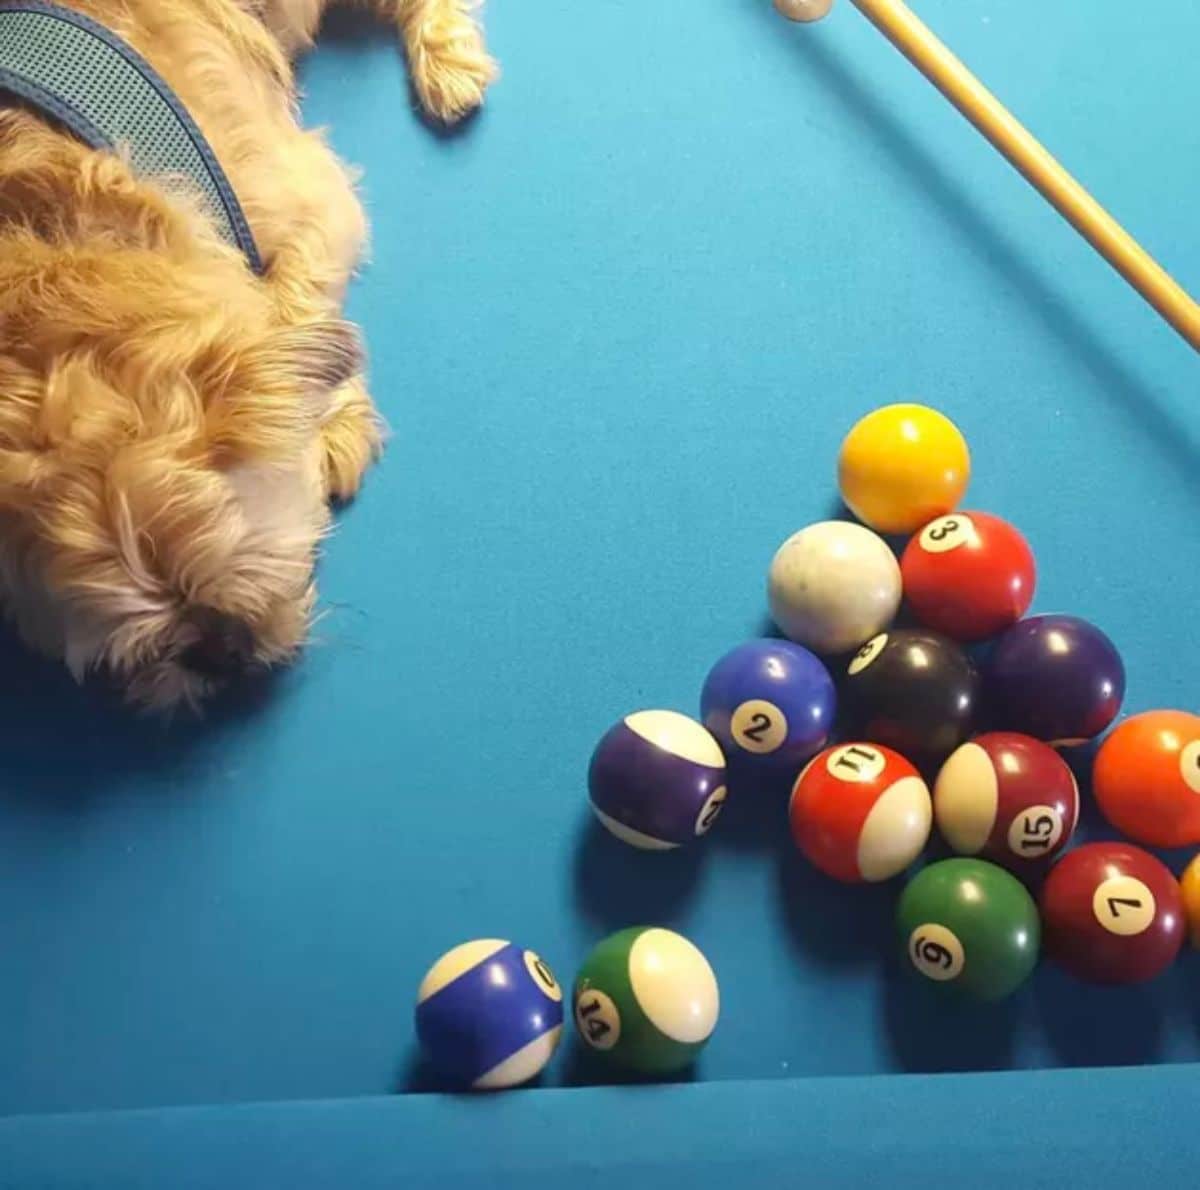 fluffy brown dog laying on a blue pool table next to the pool cue and balls